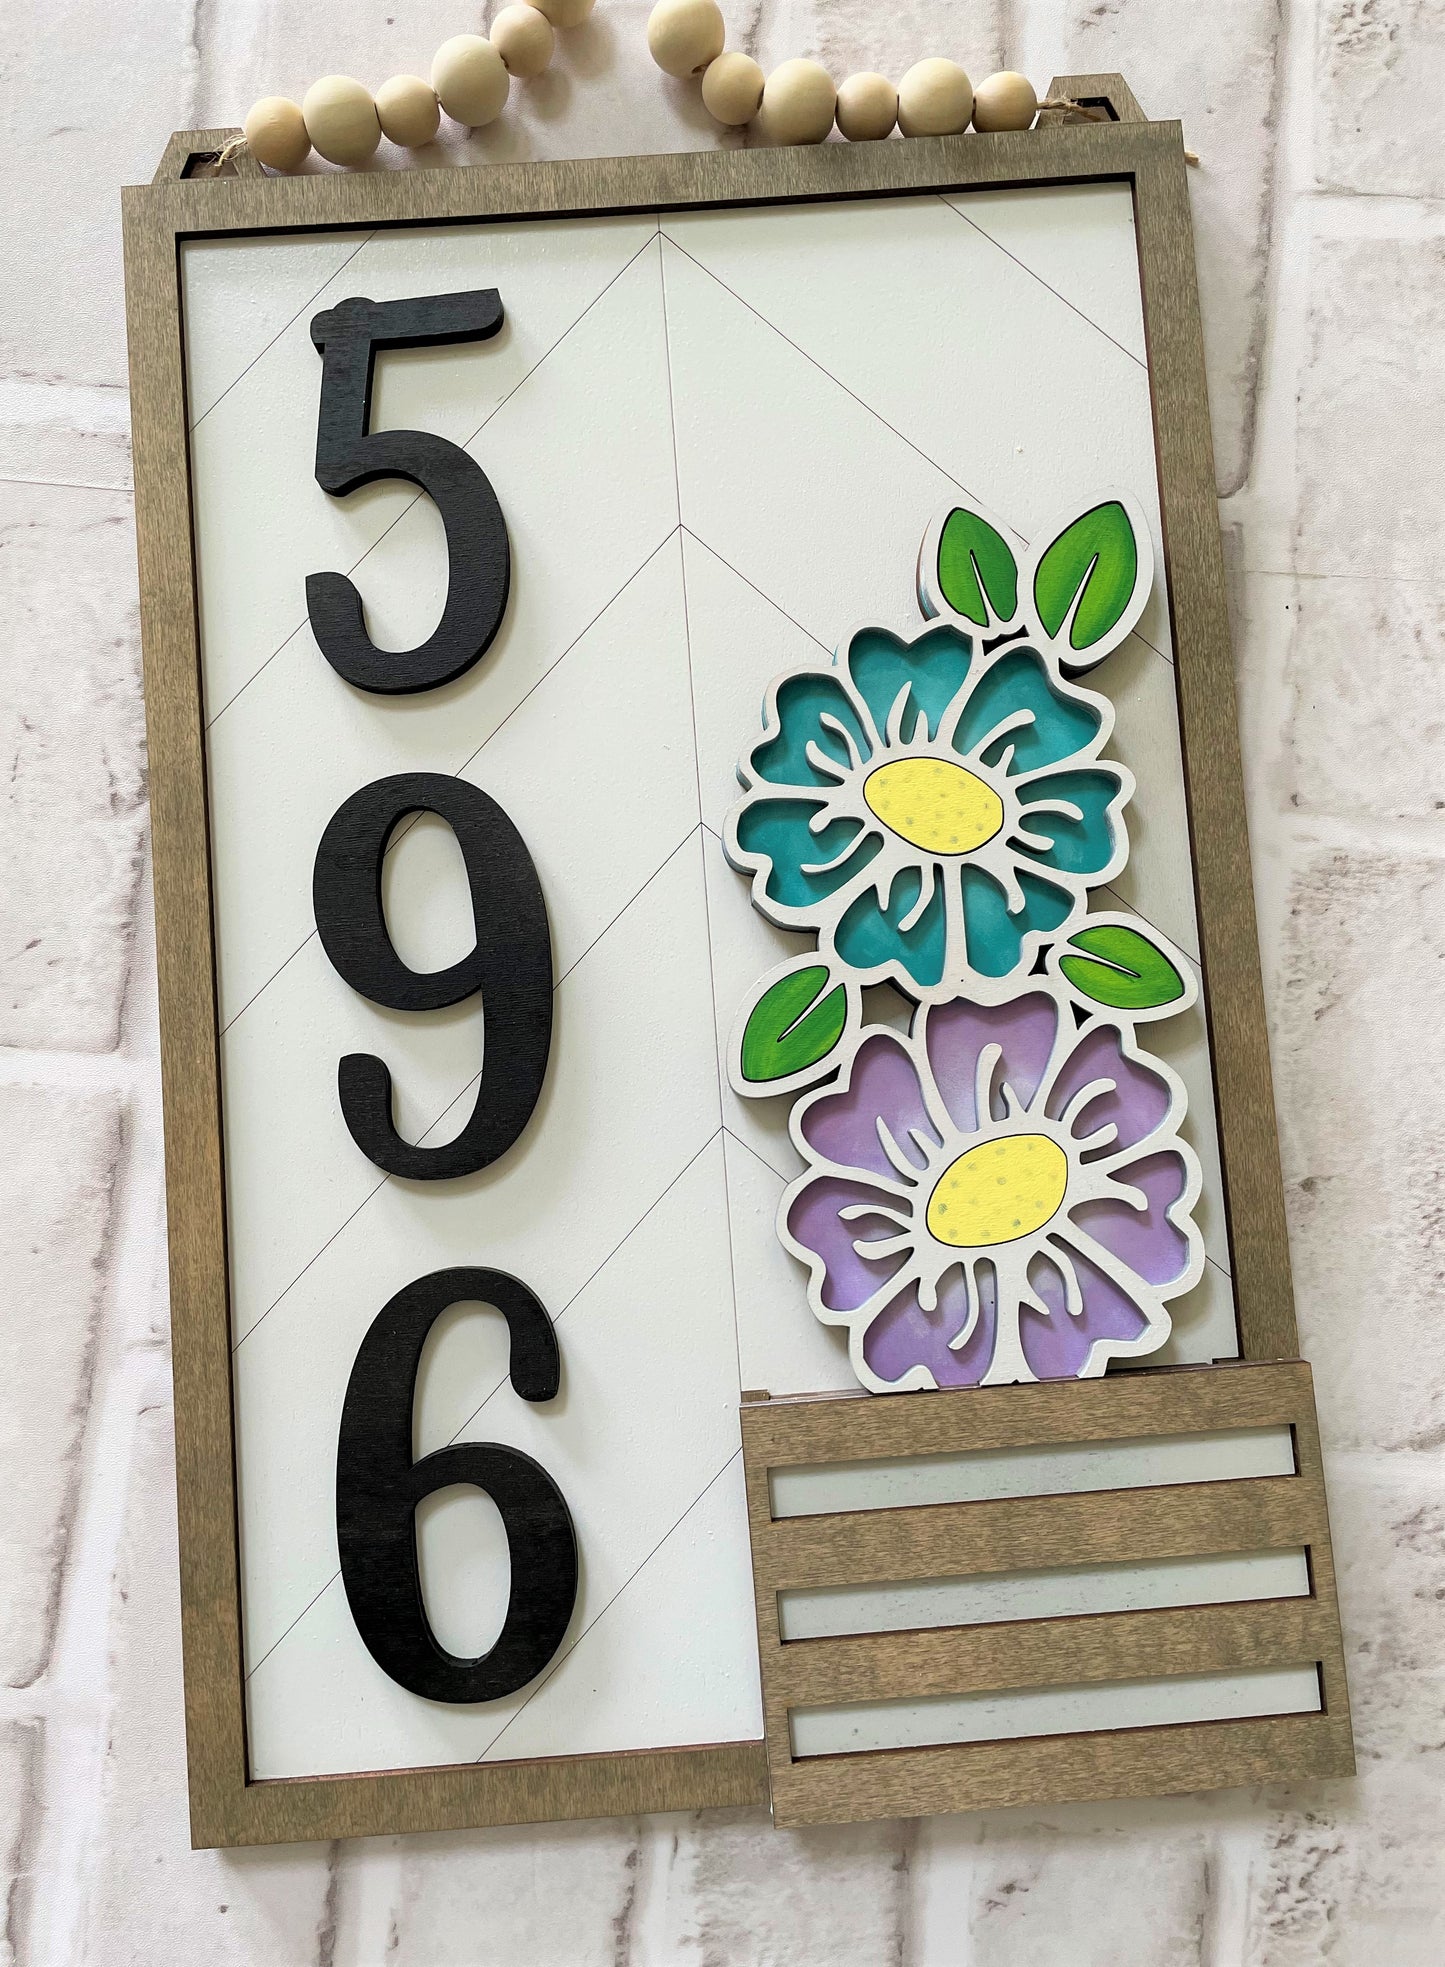 Address Plaque ( includes numbers, a letter and 2 inserts)